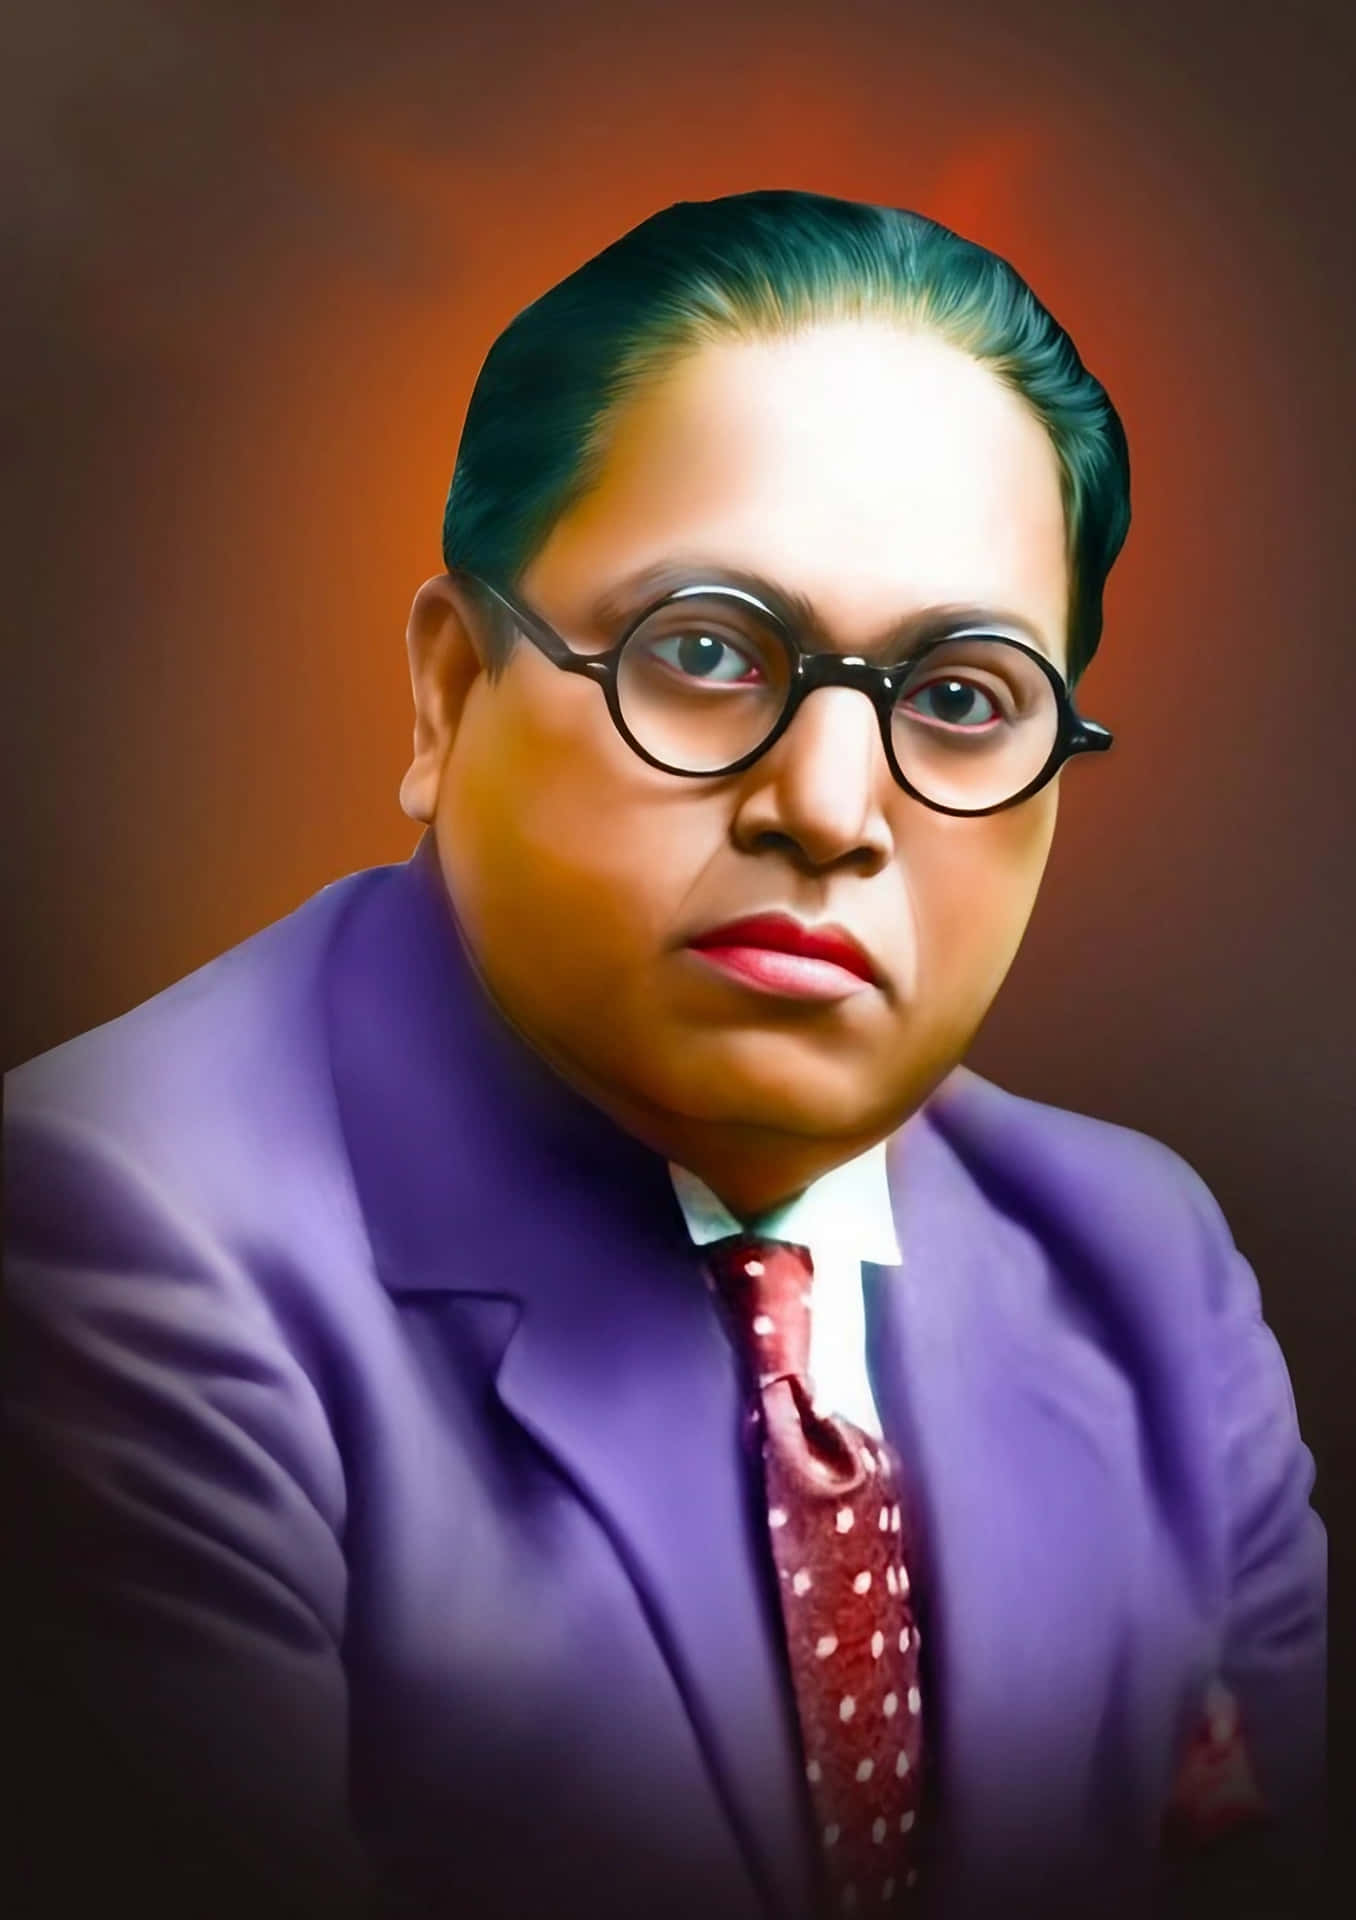 Dr. Ambedkar - An Iconic Visionary and Social Reformer